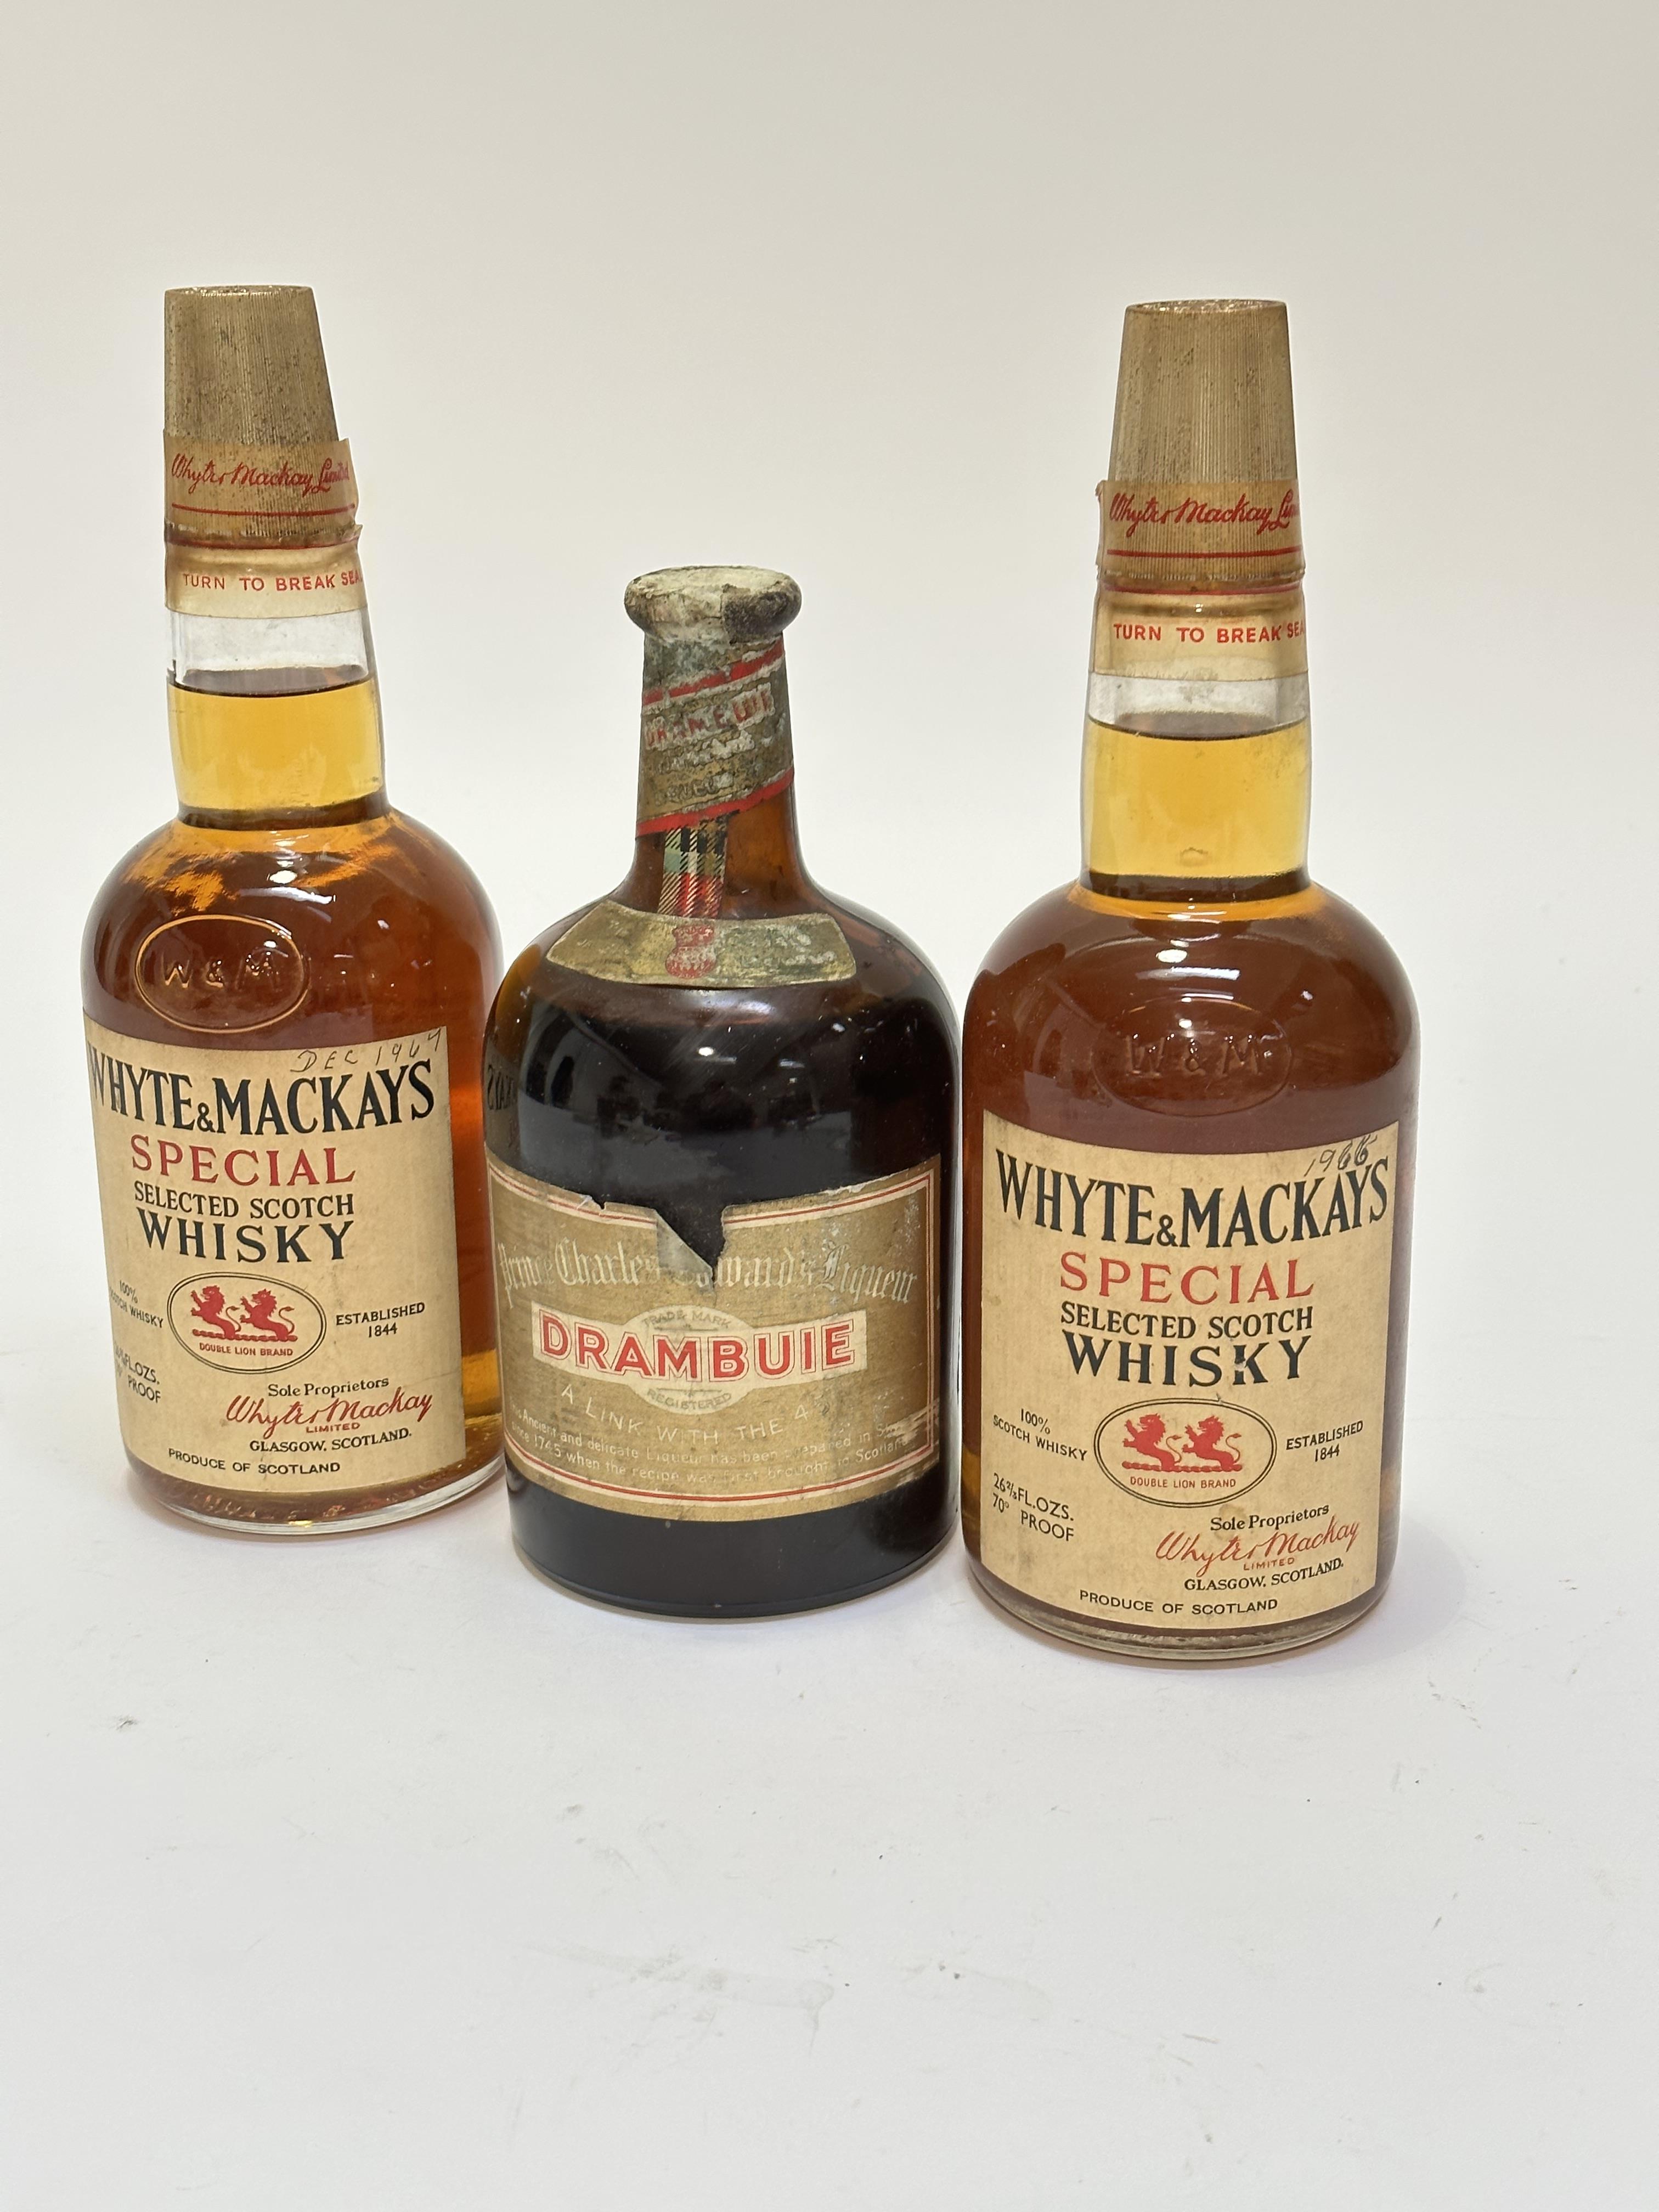 Two bottles of Whyte & Mackays Special Selected Scotch Whisky circa 1966 and 1967, seals are intact,